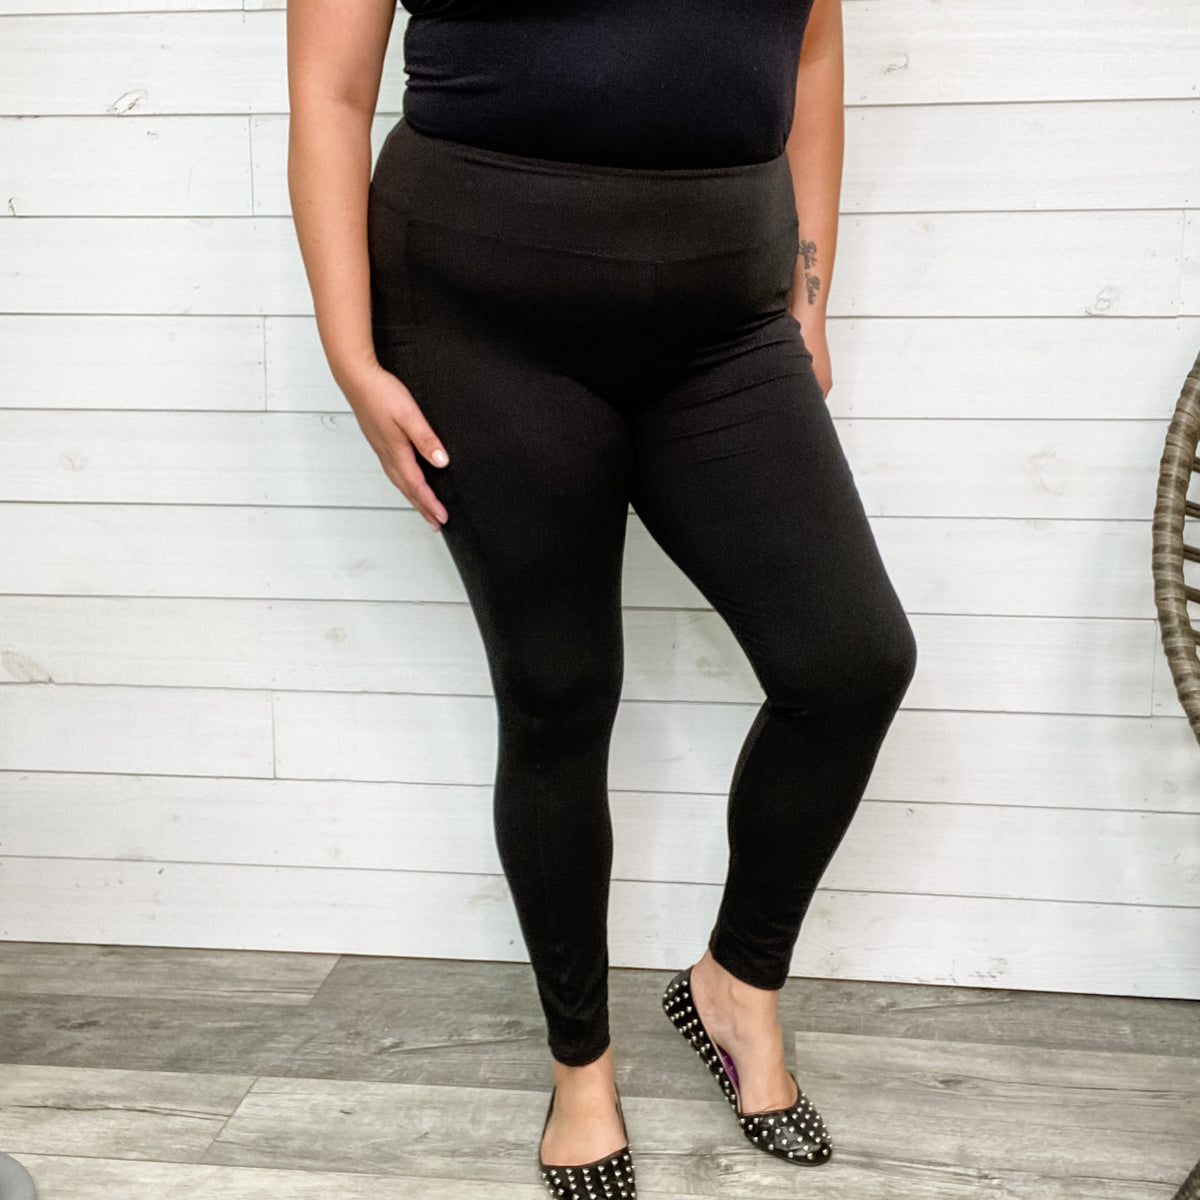 Classic Black Leggings With Pockets (Adult & Kids)